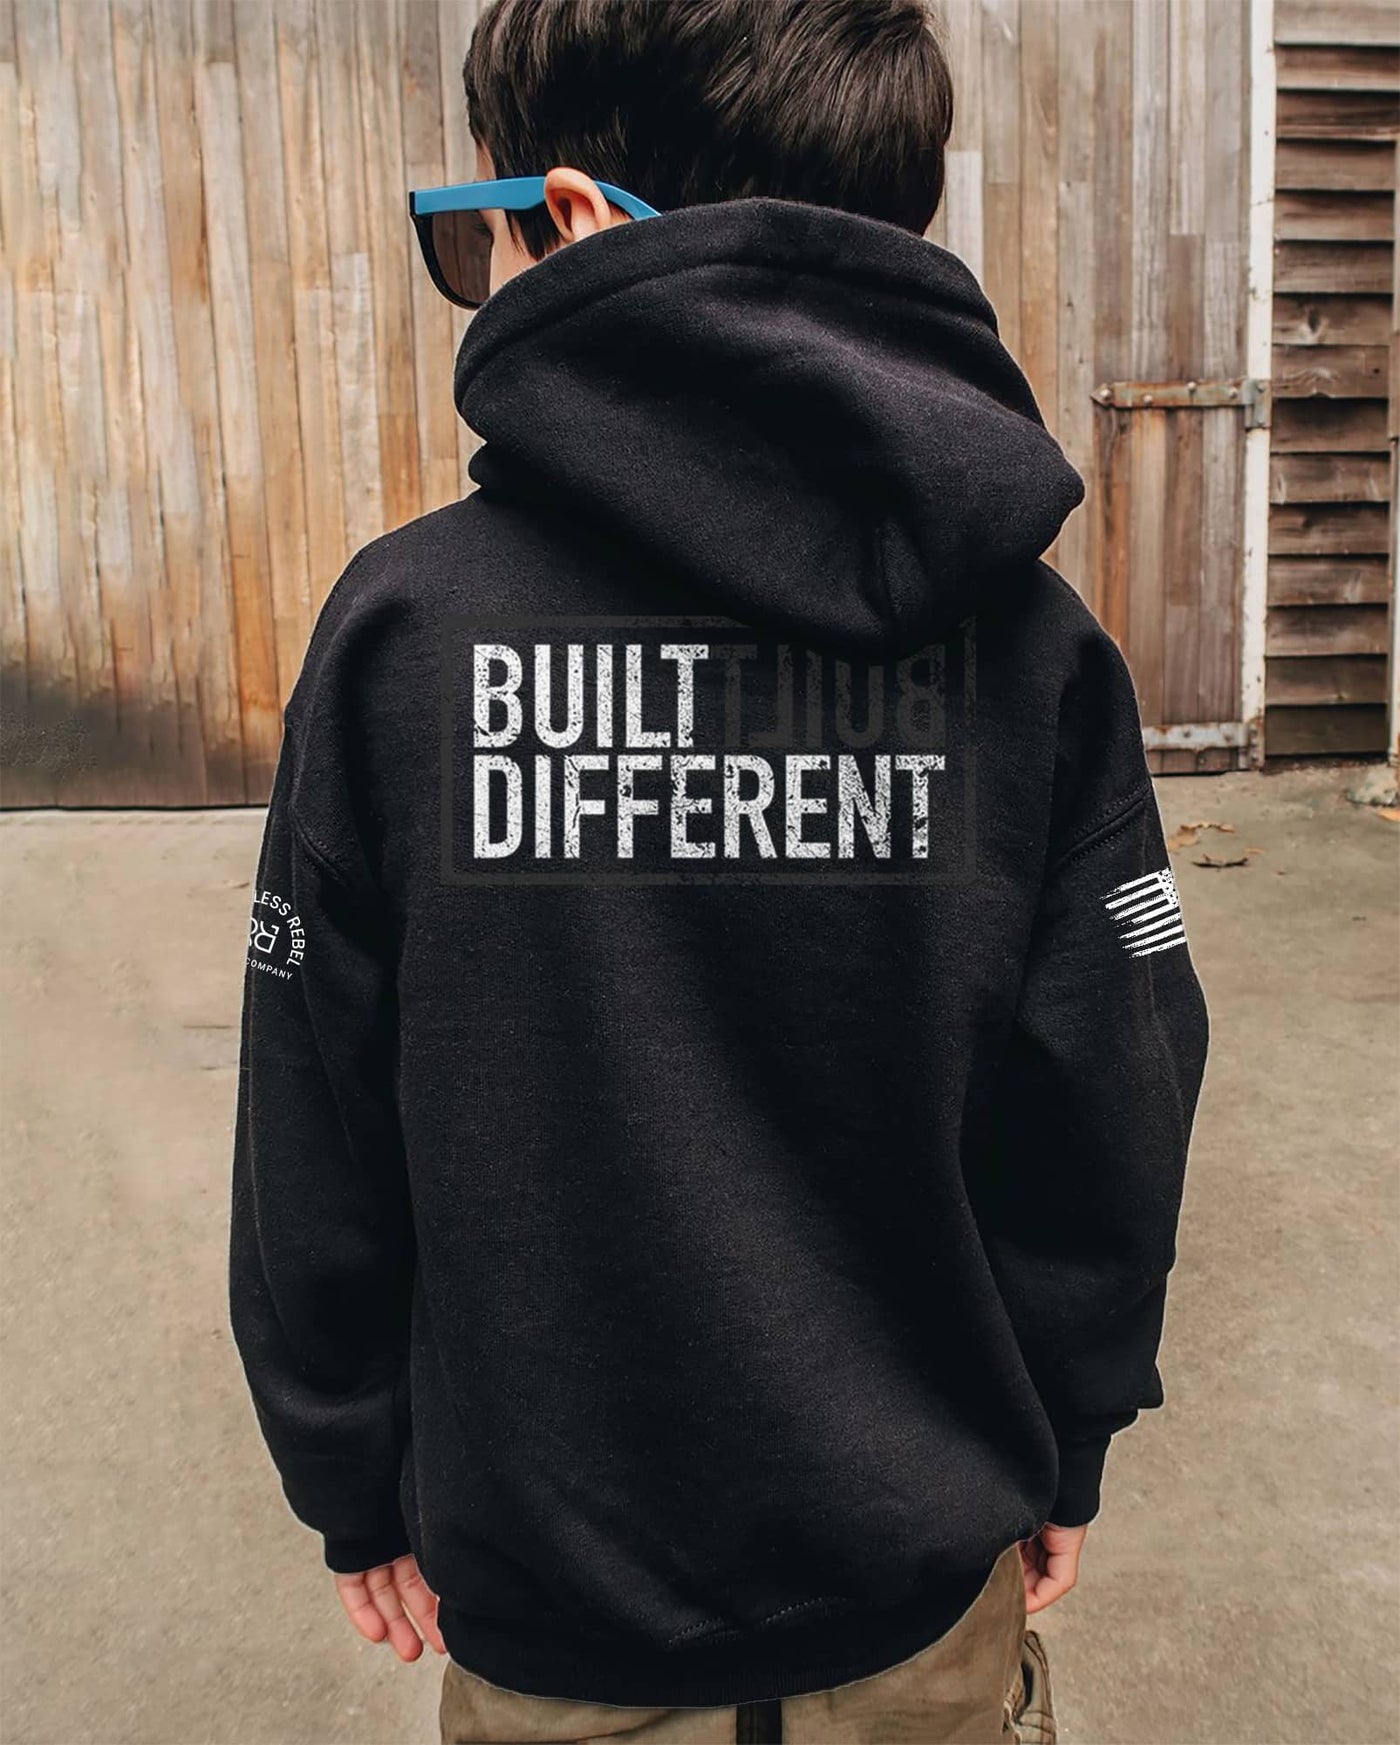 Boy Wearing Solid Black Youth Built Different Back Design Hoodie